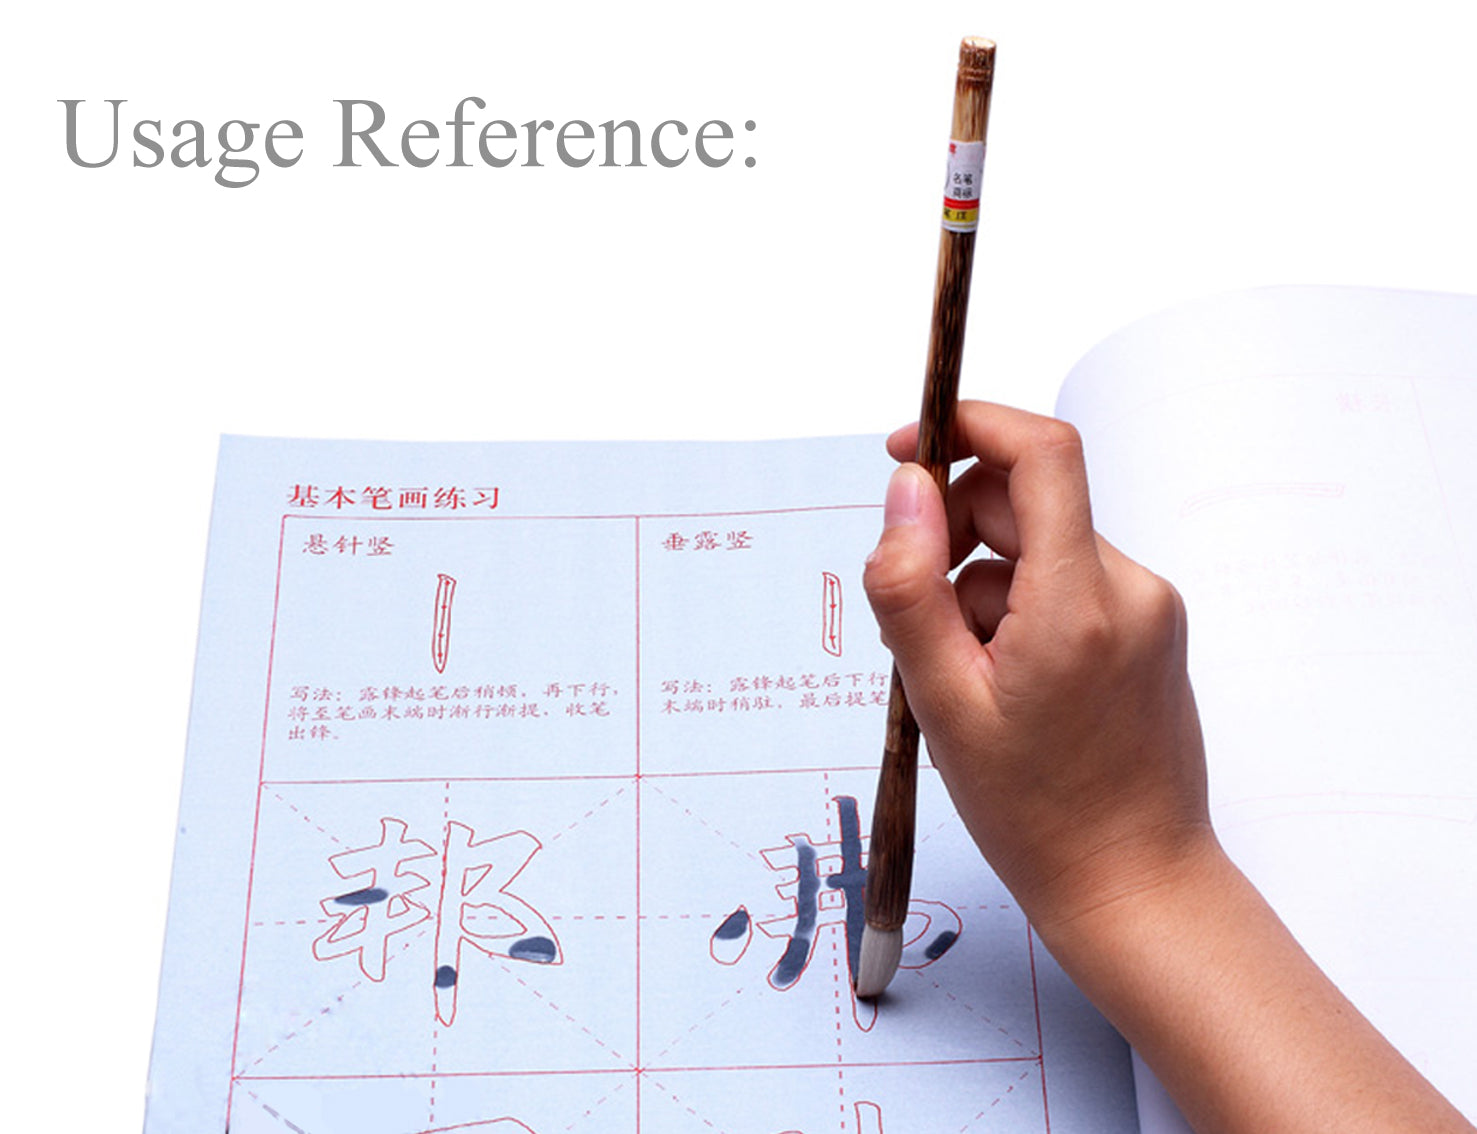 The Best Chinese Calligraphy Paper - Review and Buying Guide — ANIME  Impulse ™